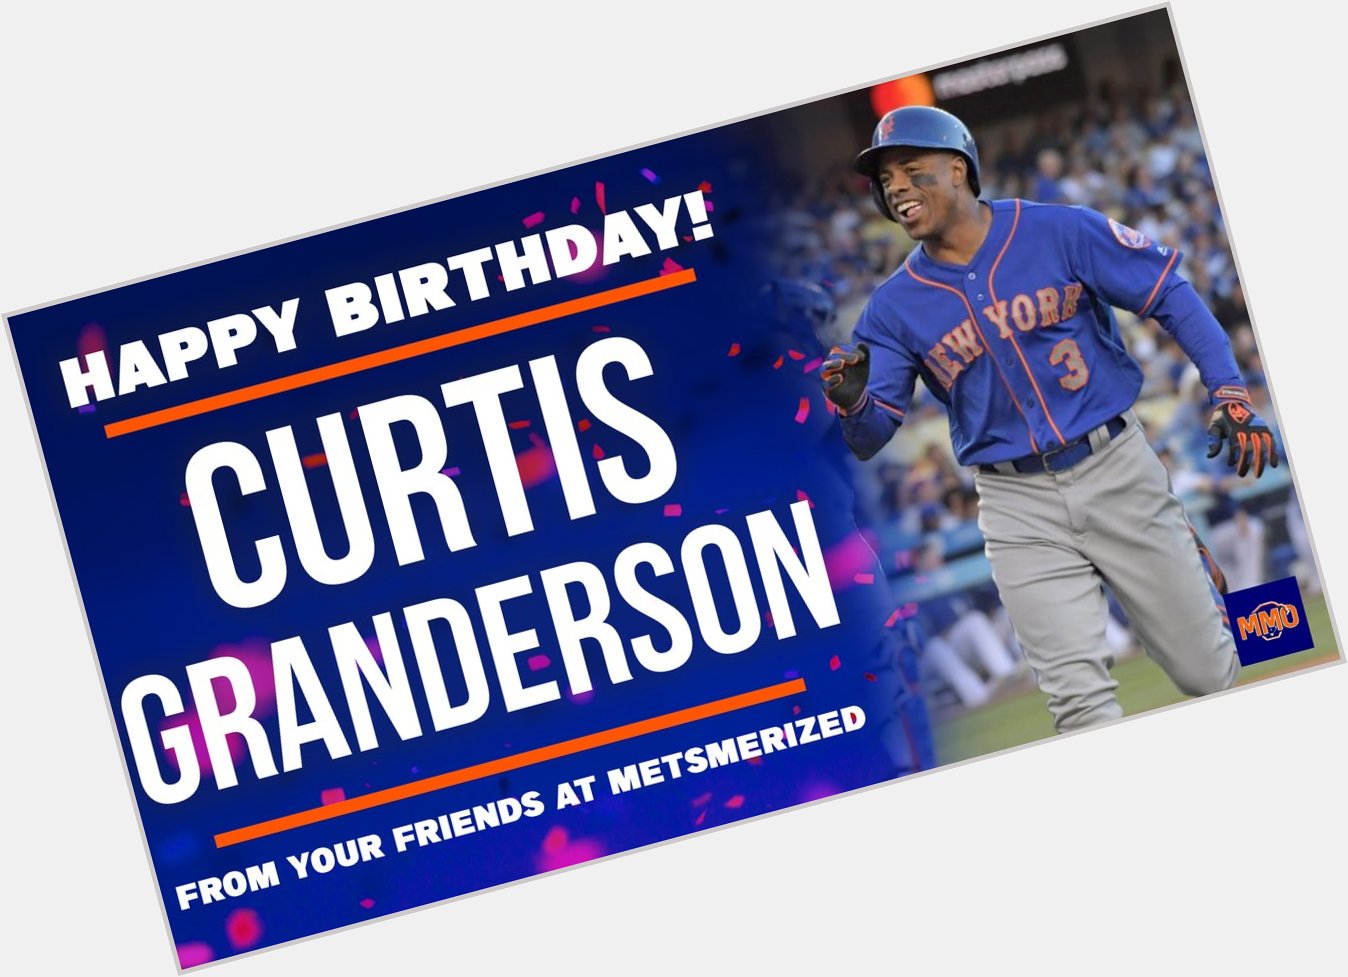 Happy Birthday to a great Met on and off the field, Curtis Granderson! 